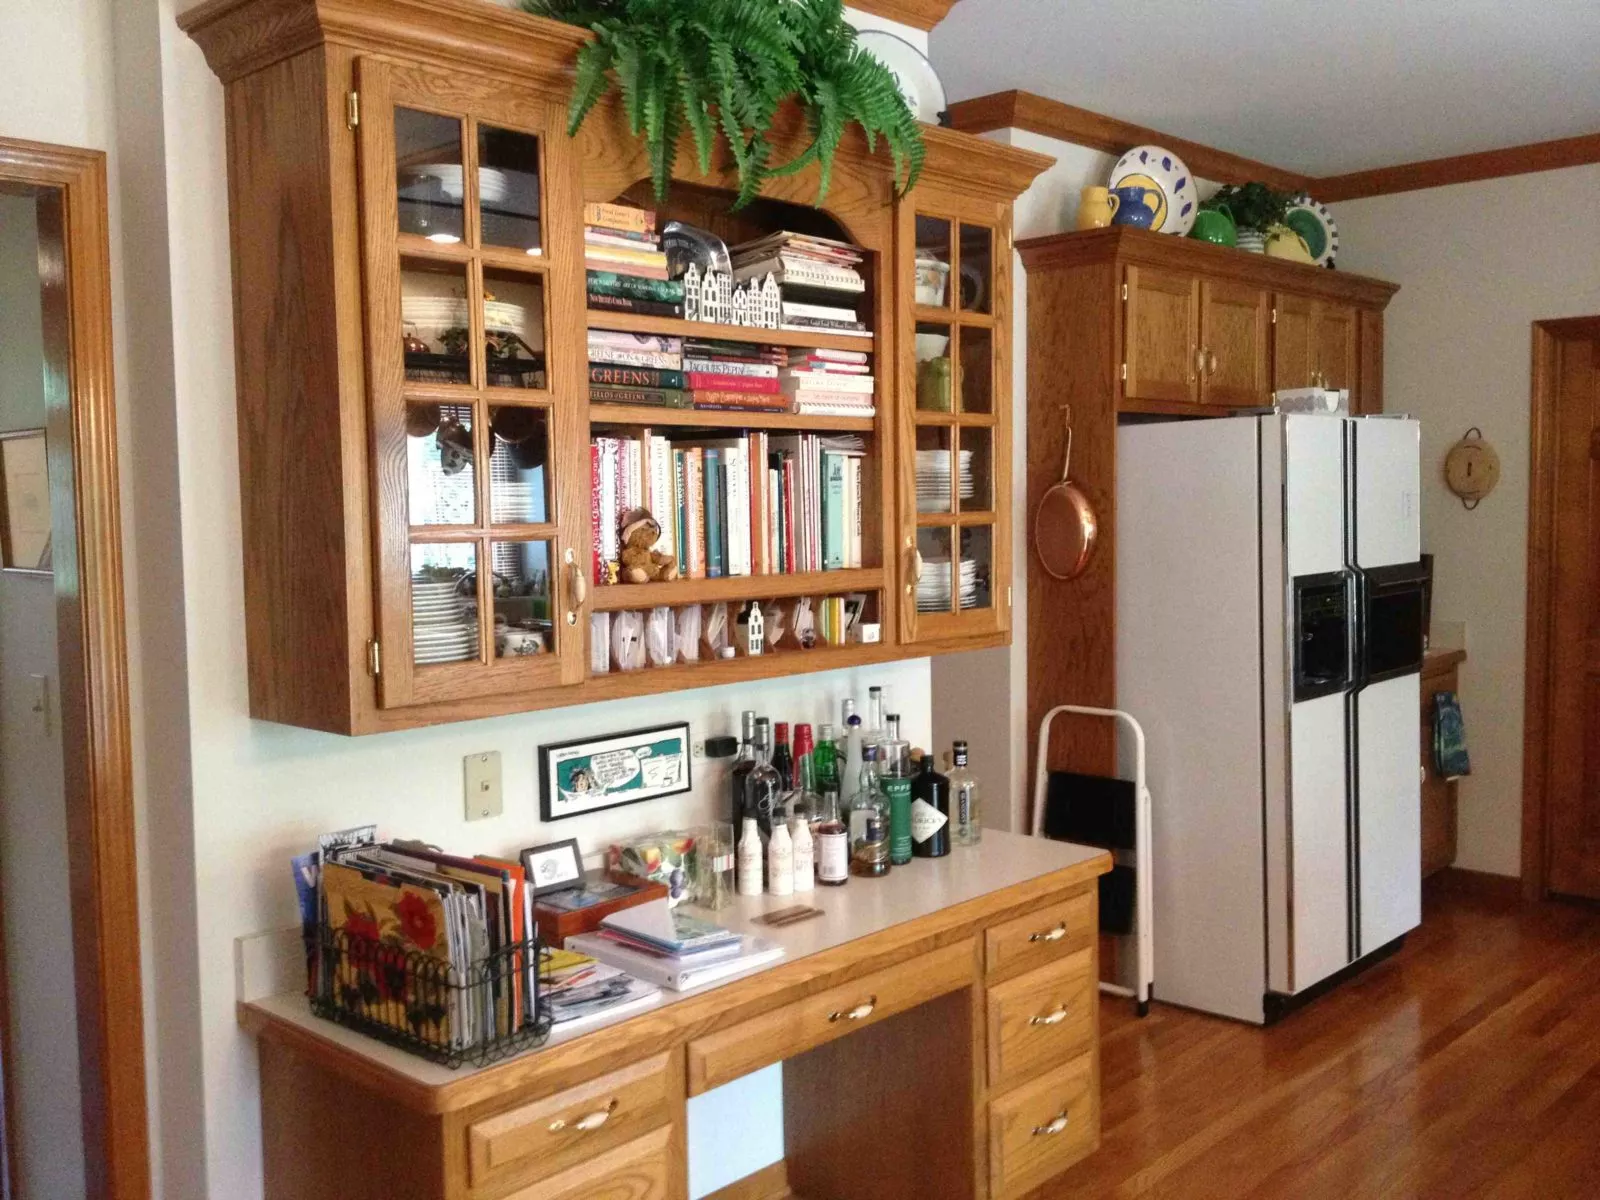 home kitchen design with custom cabinets and bookshelf